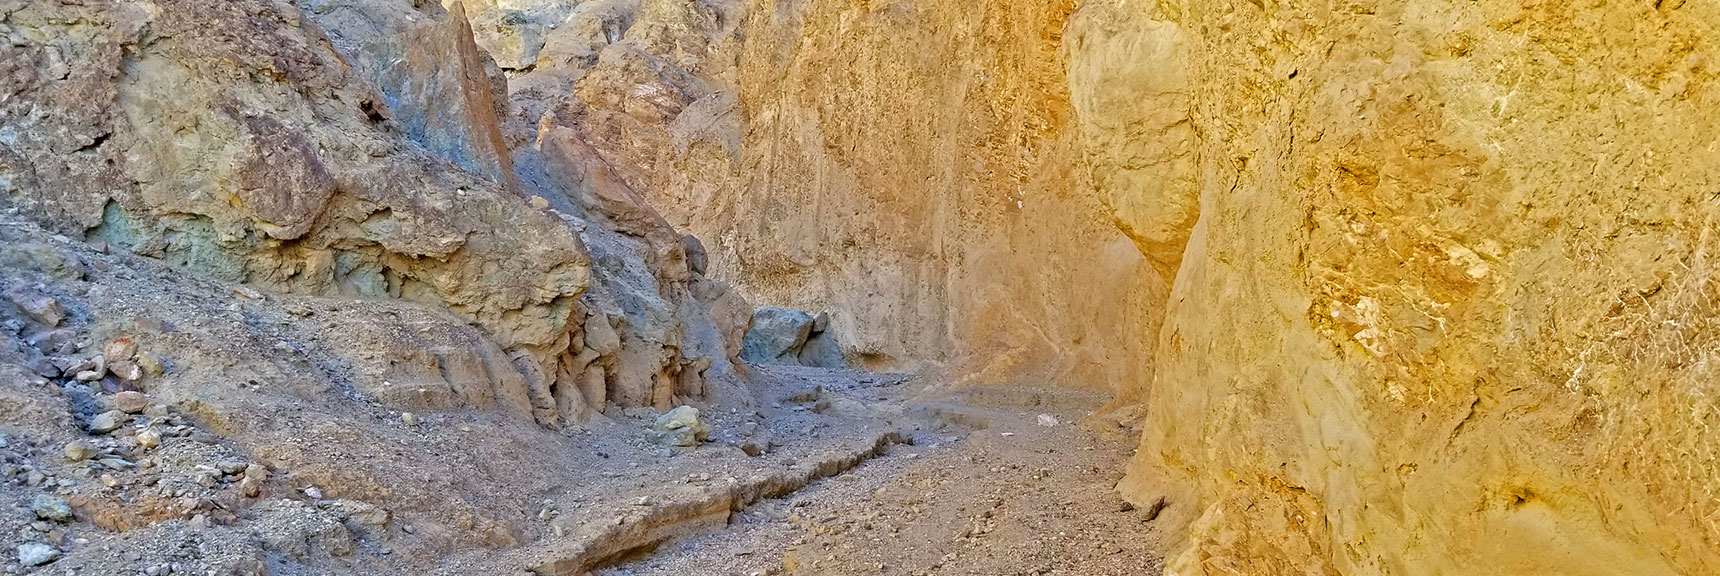 Continuing up 2nd Dip Canyon Above the Dry Waterfall. 40ft High Vertical Walls to Right | Artists Drive Hidden Canyon Hikes | Death Valley National Park, California